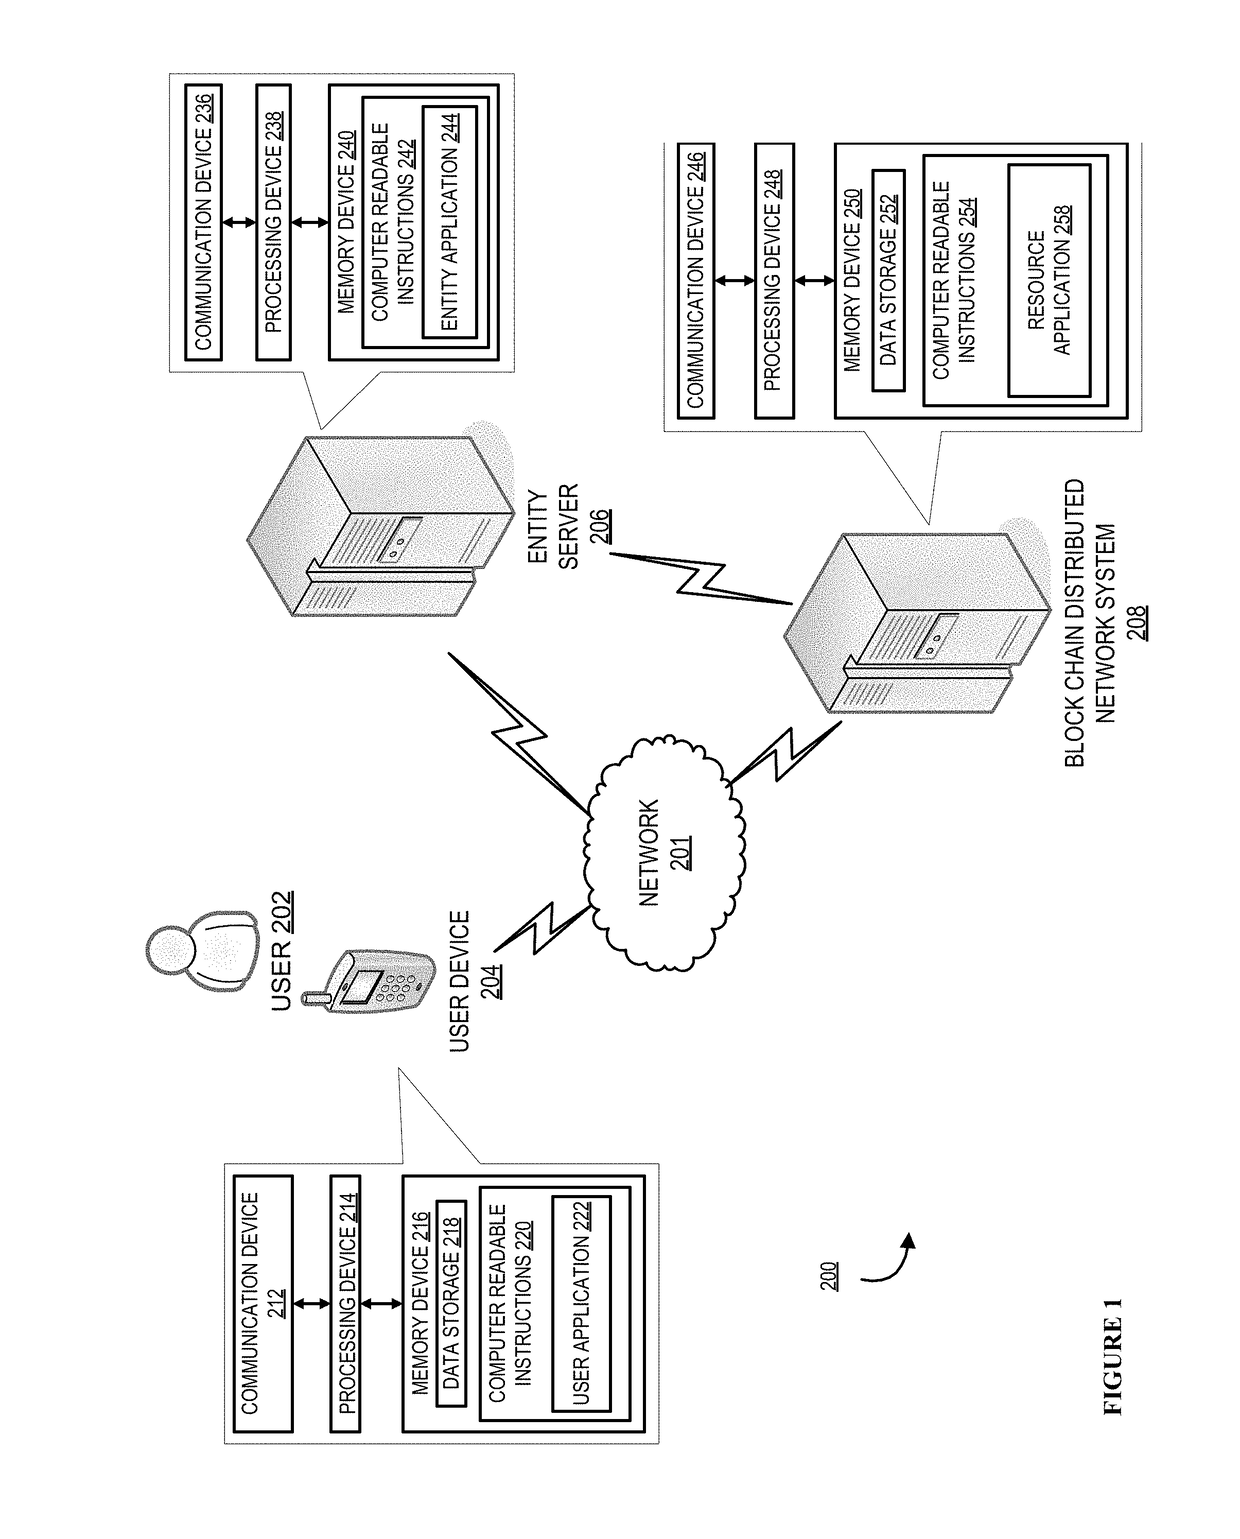 System for transforming large scale electronic processing using application block chain